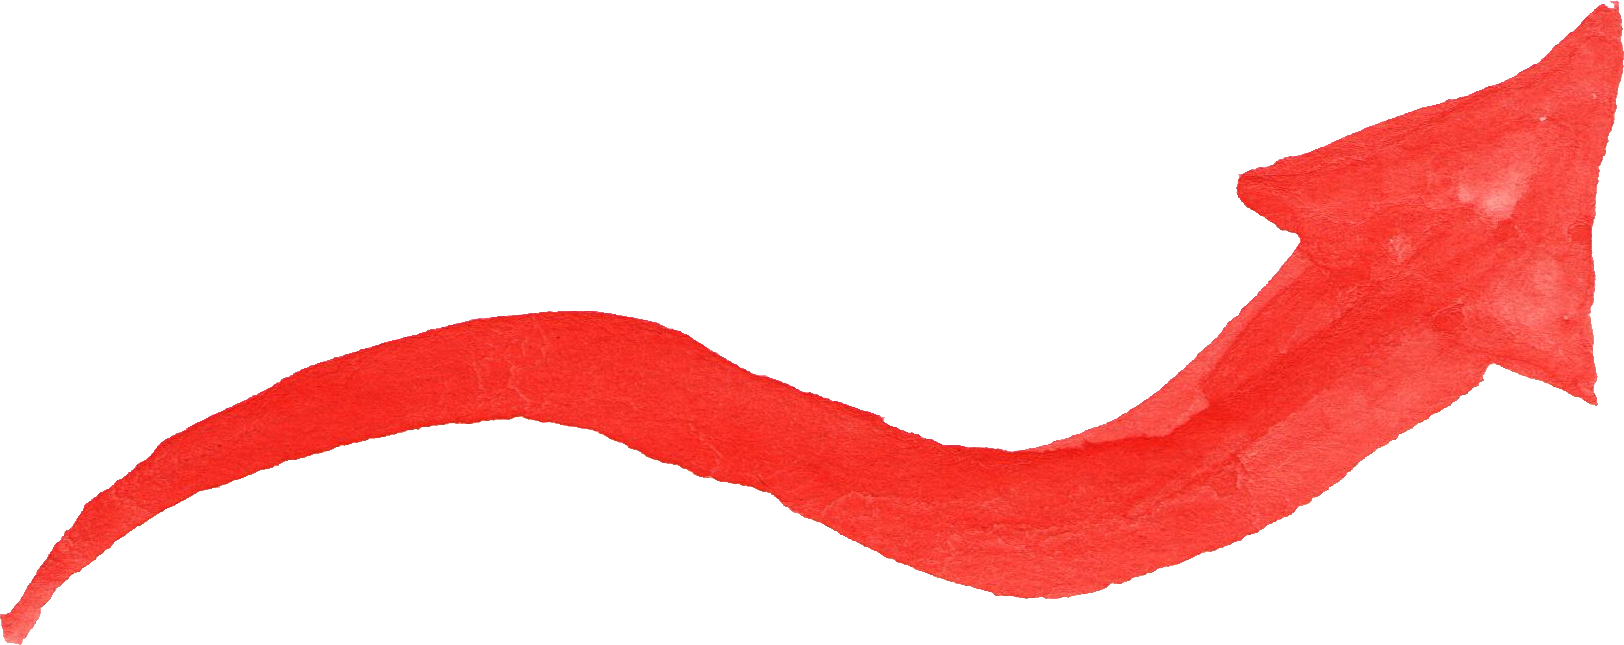 Free Download - Red Arrow Watercolor (1624x645)